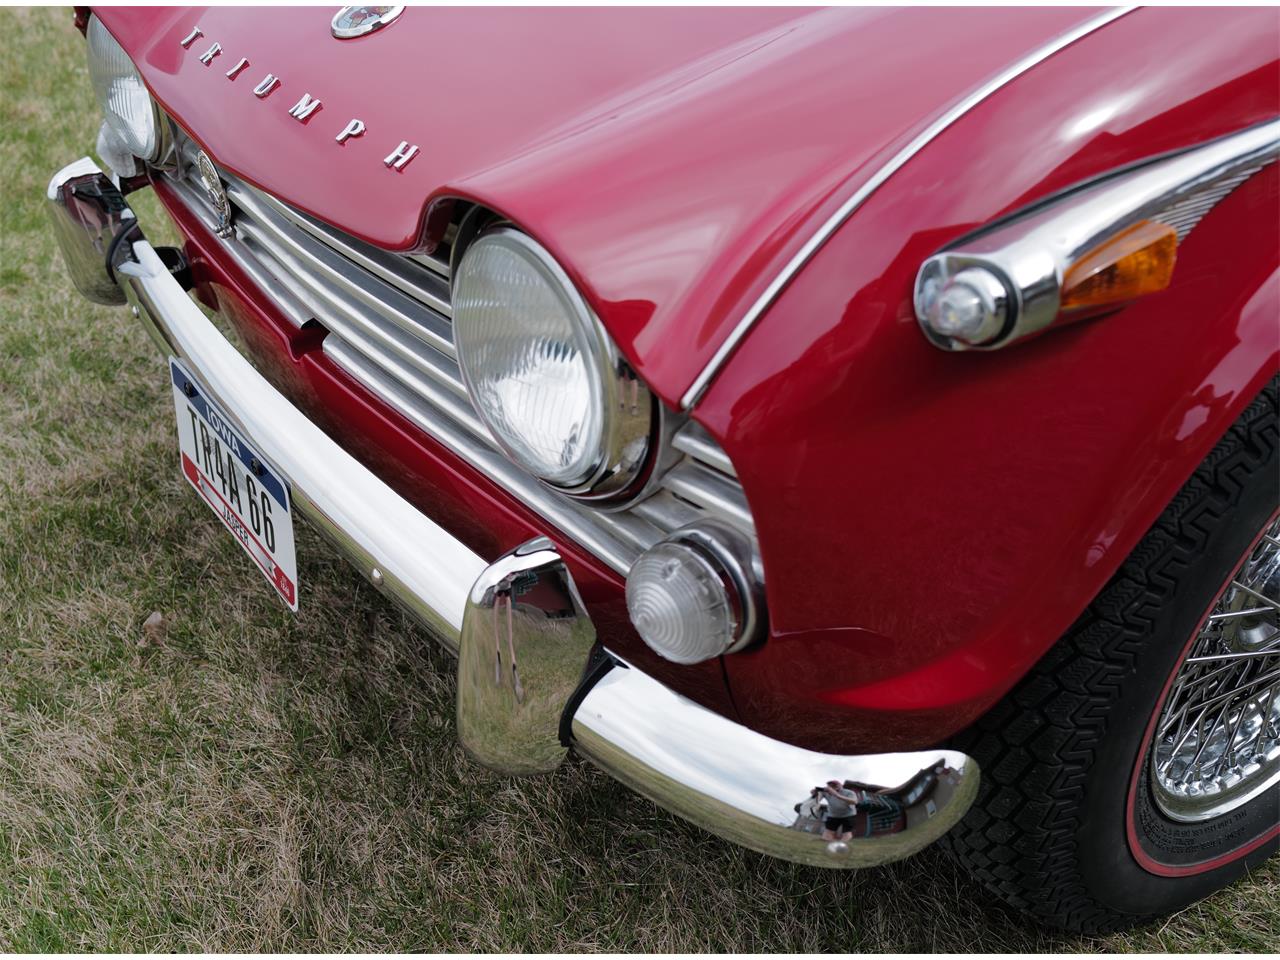 1966 Triumph TR4 for sale in Grinnell, IA – photo 3